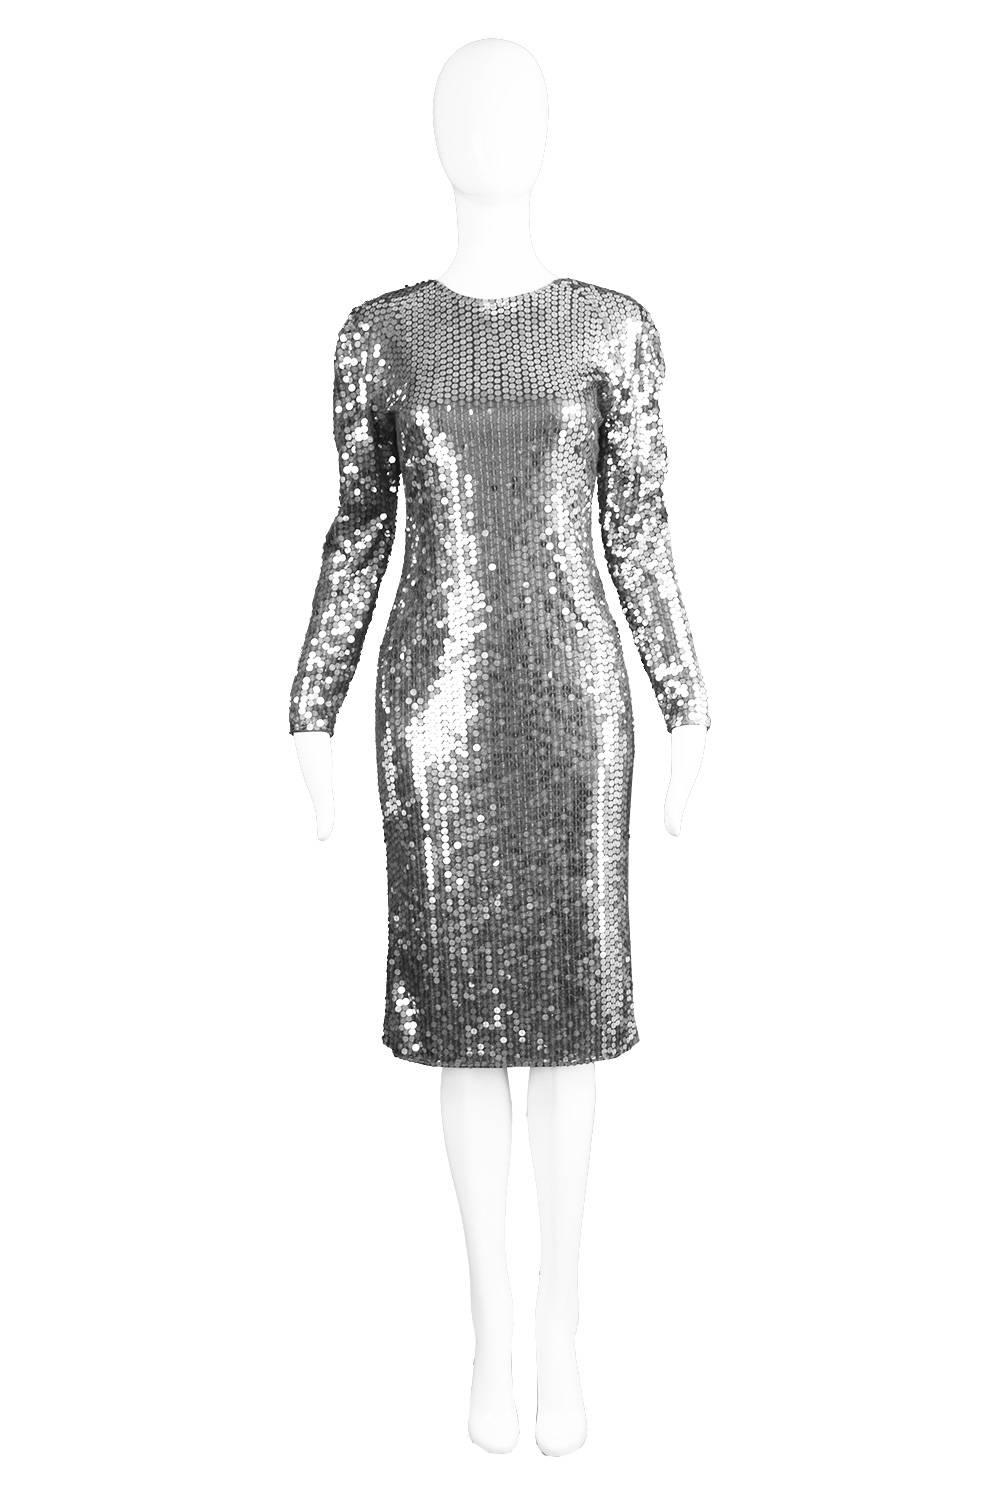 A glamorous vintage Halston party dress from the 1970s with silver sequins on a jersey fabric and a deep scoop back

Estimated Size: UK 10/ US 6/ EU 38
Bust - 34” / 86cm
Waist - 28” / 71cm
Hips - 36” / 91cm
Length (Shoulder to Hem) - 41” /